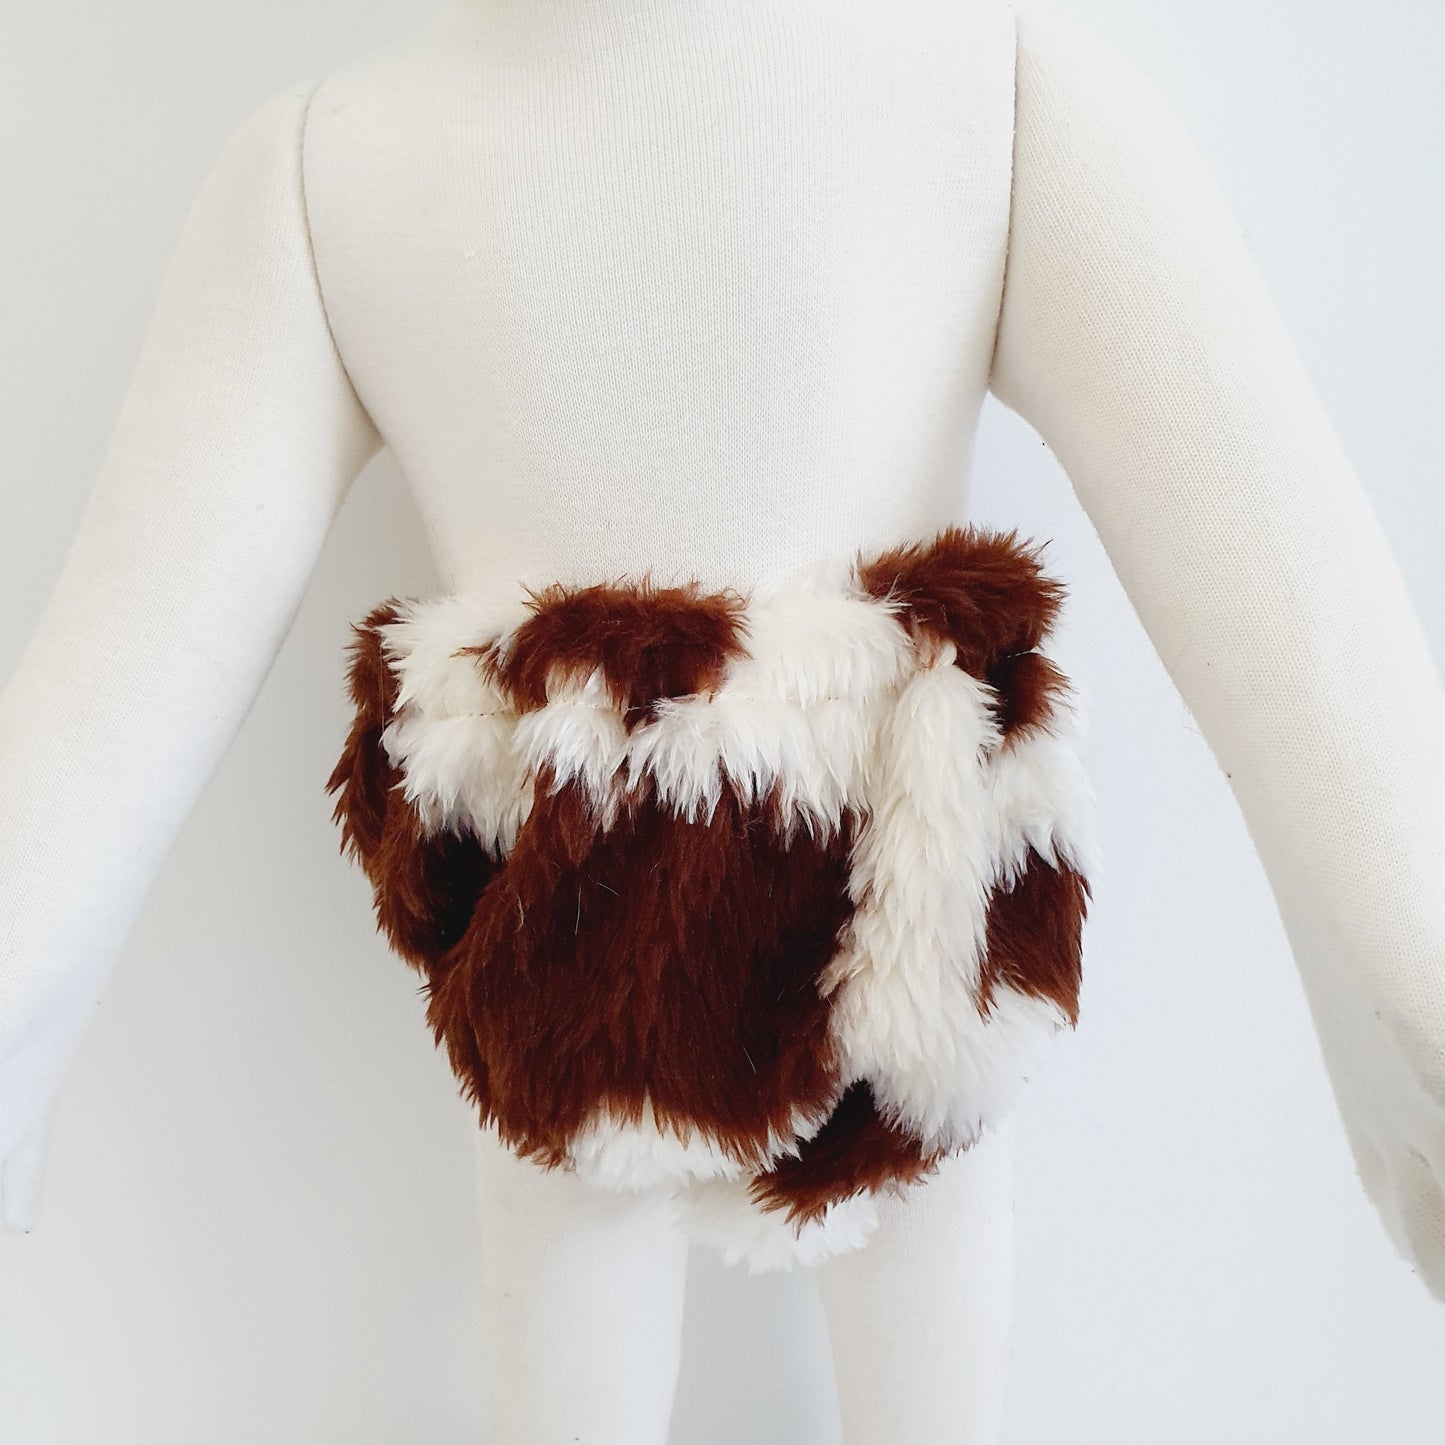 FAUX FUR - COW - Fake Animal Hair Baby Nappy Cover, Size 0 (6-12 months)